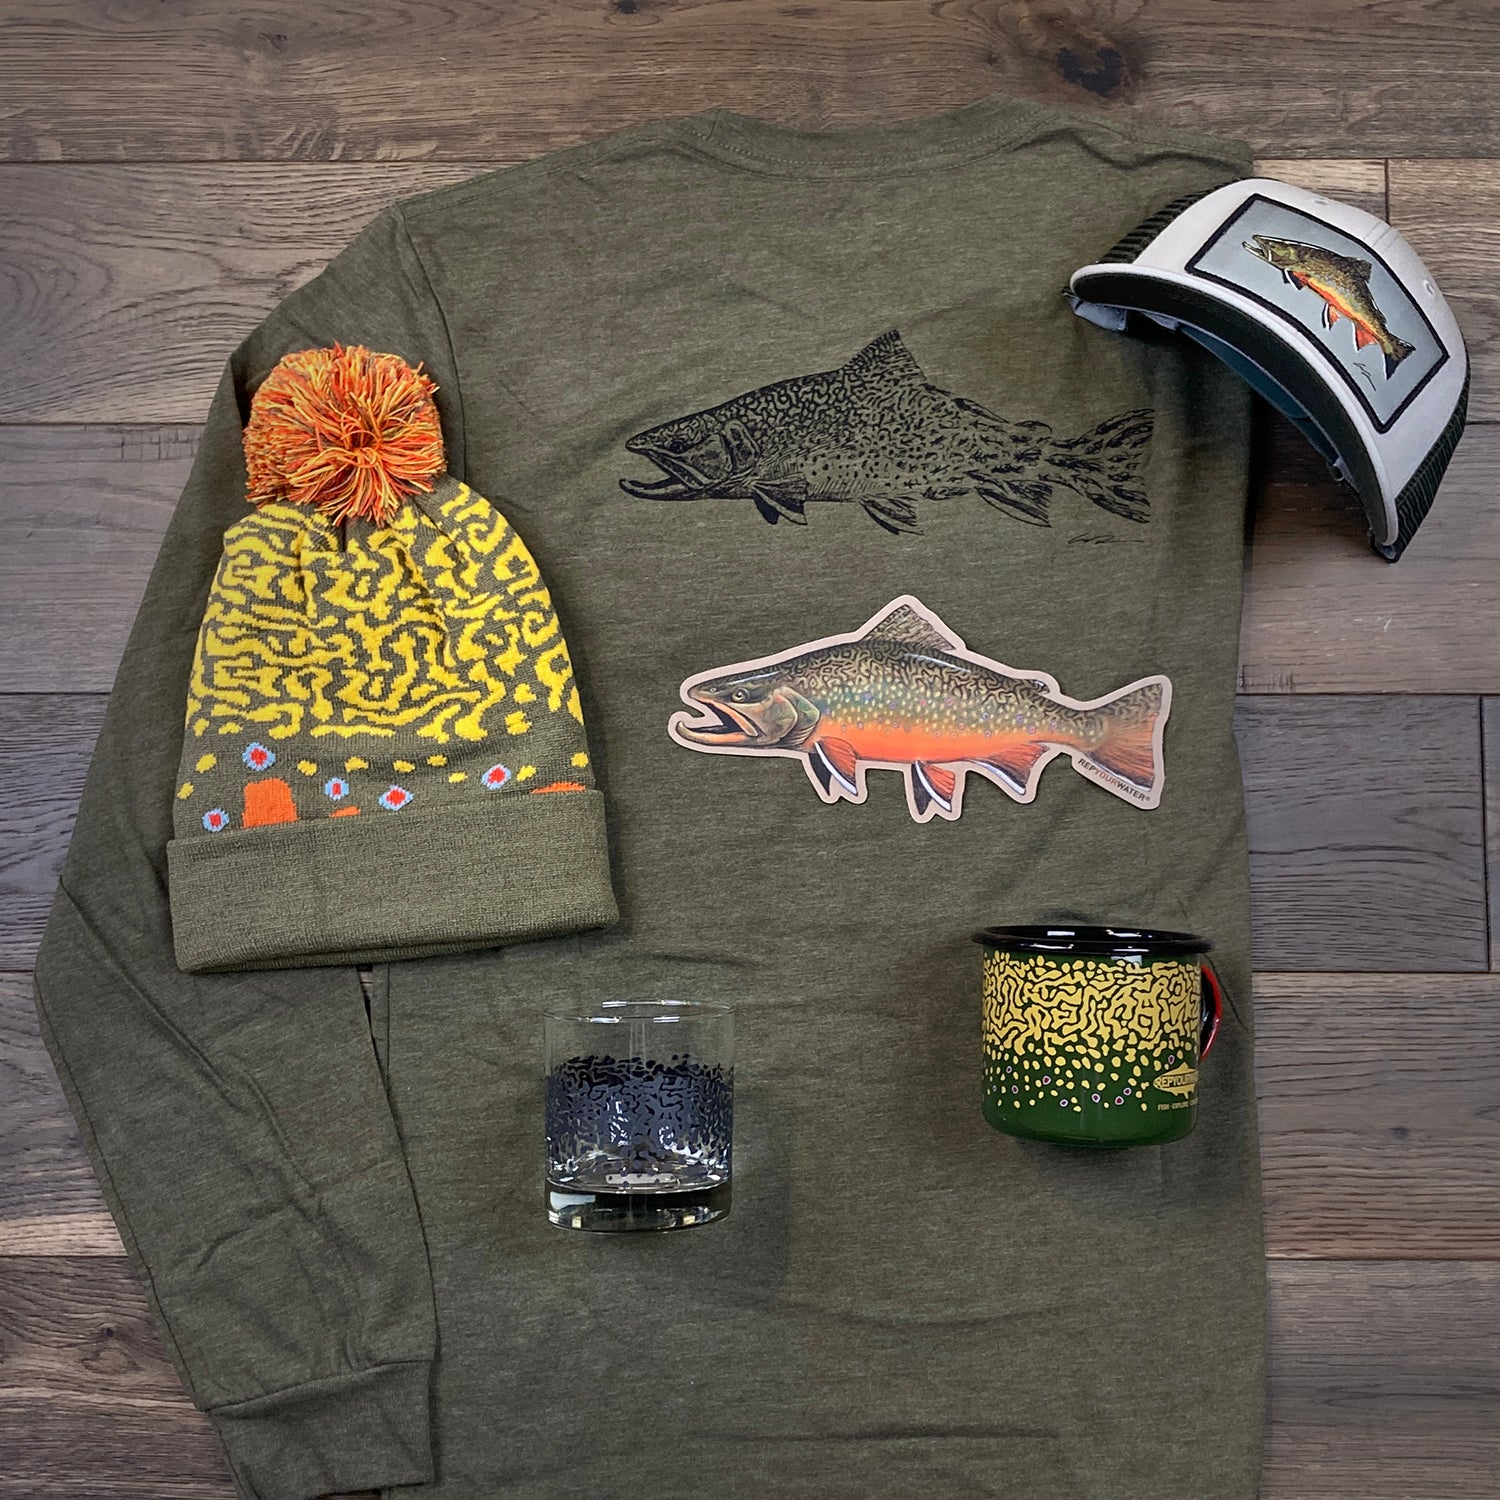 A long sleeved shirt, knit hat, sticker, mug, glass and brimmed hat A hat, shirt, pair of socks and two stickers laid out on a wood floor.